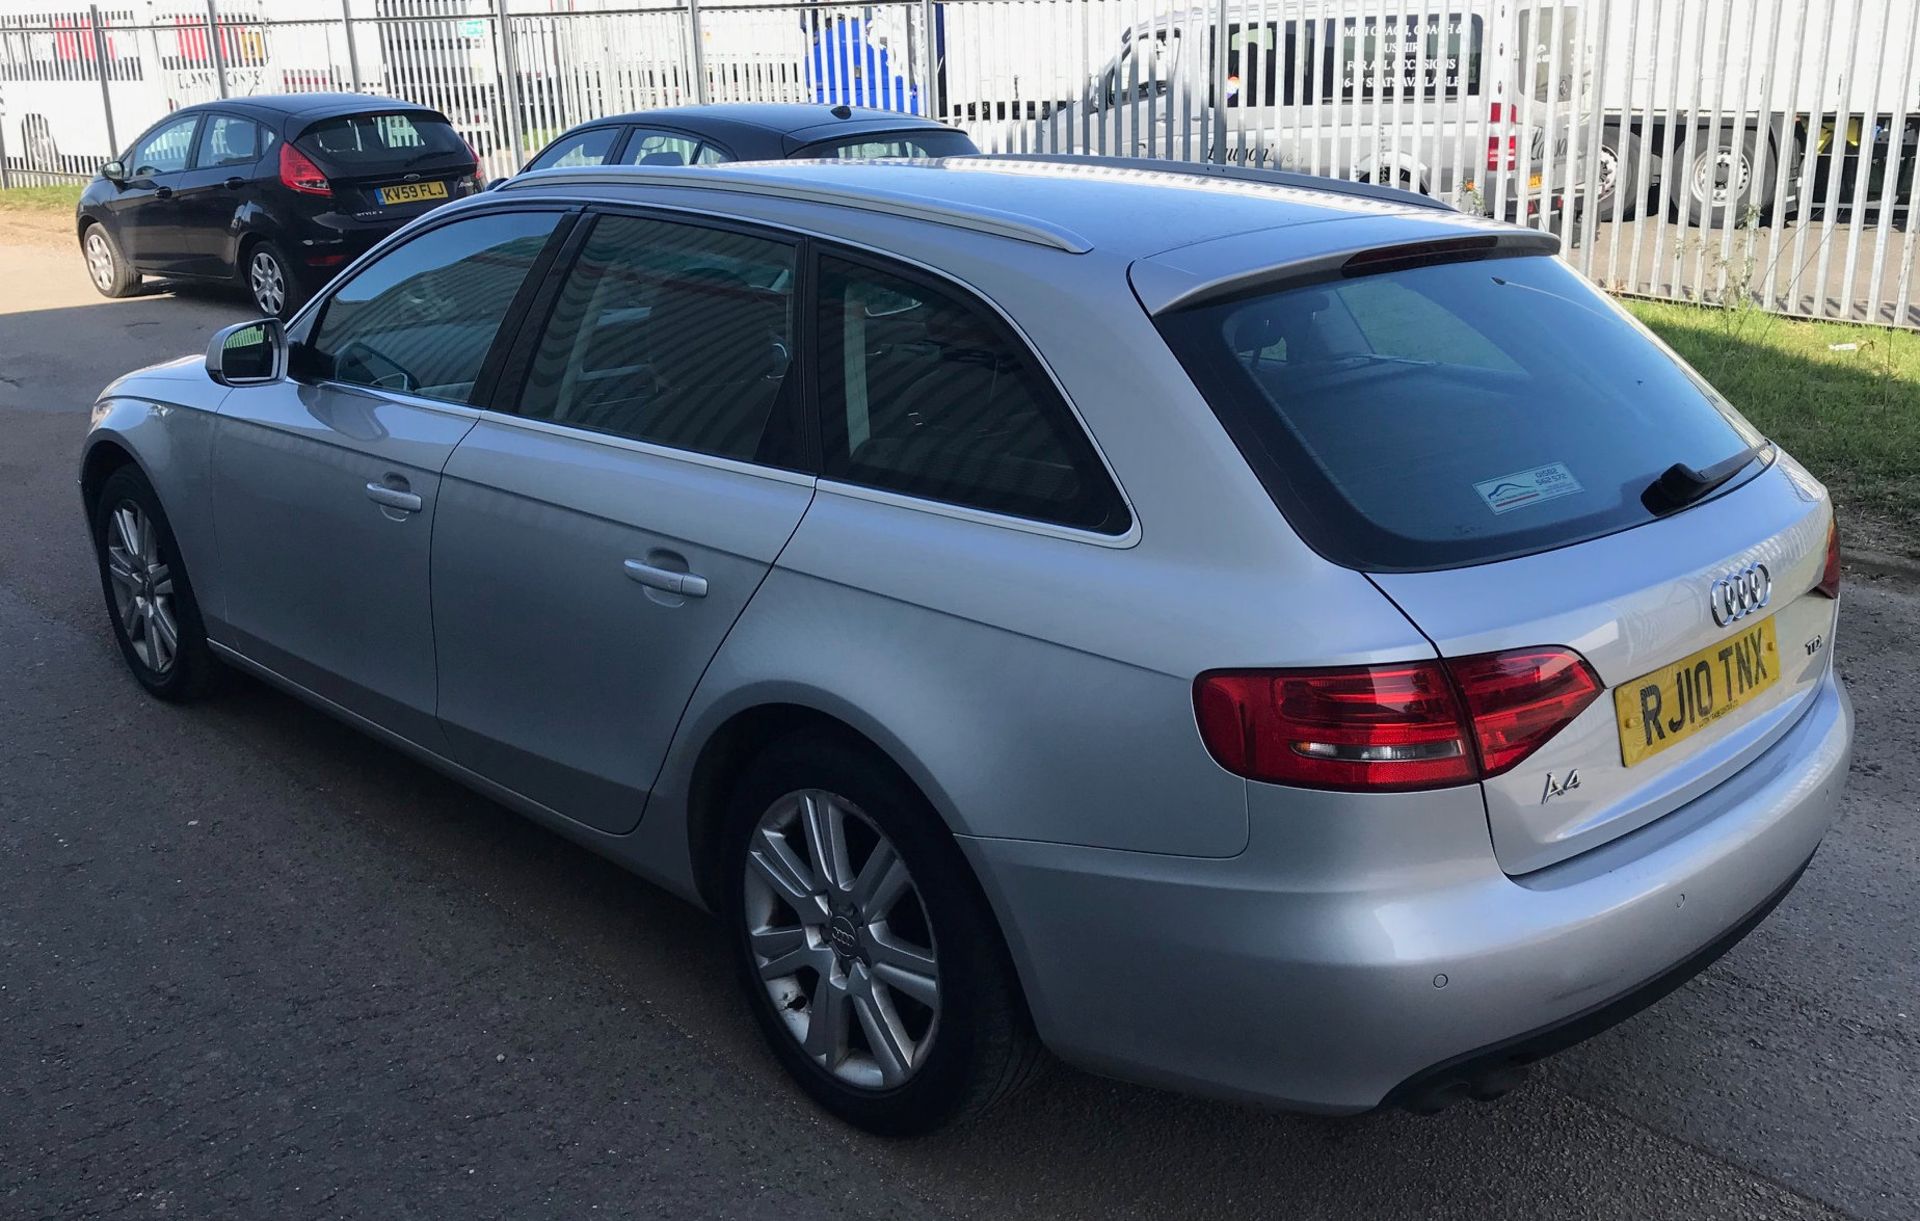 2012 Audi A4 2.0 Tdi SE Avant Automatic 5 Door Estate - CL505 - NO VAT ON THE HAMMER - Location: - Image 4 of 13